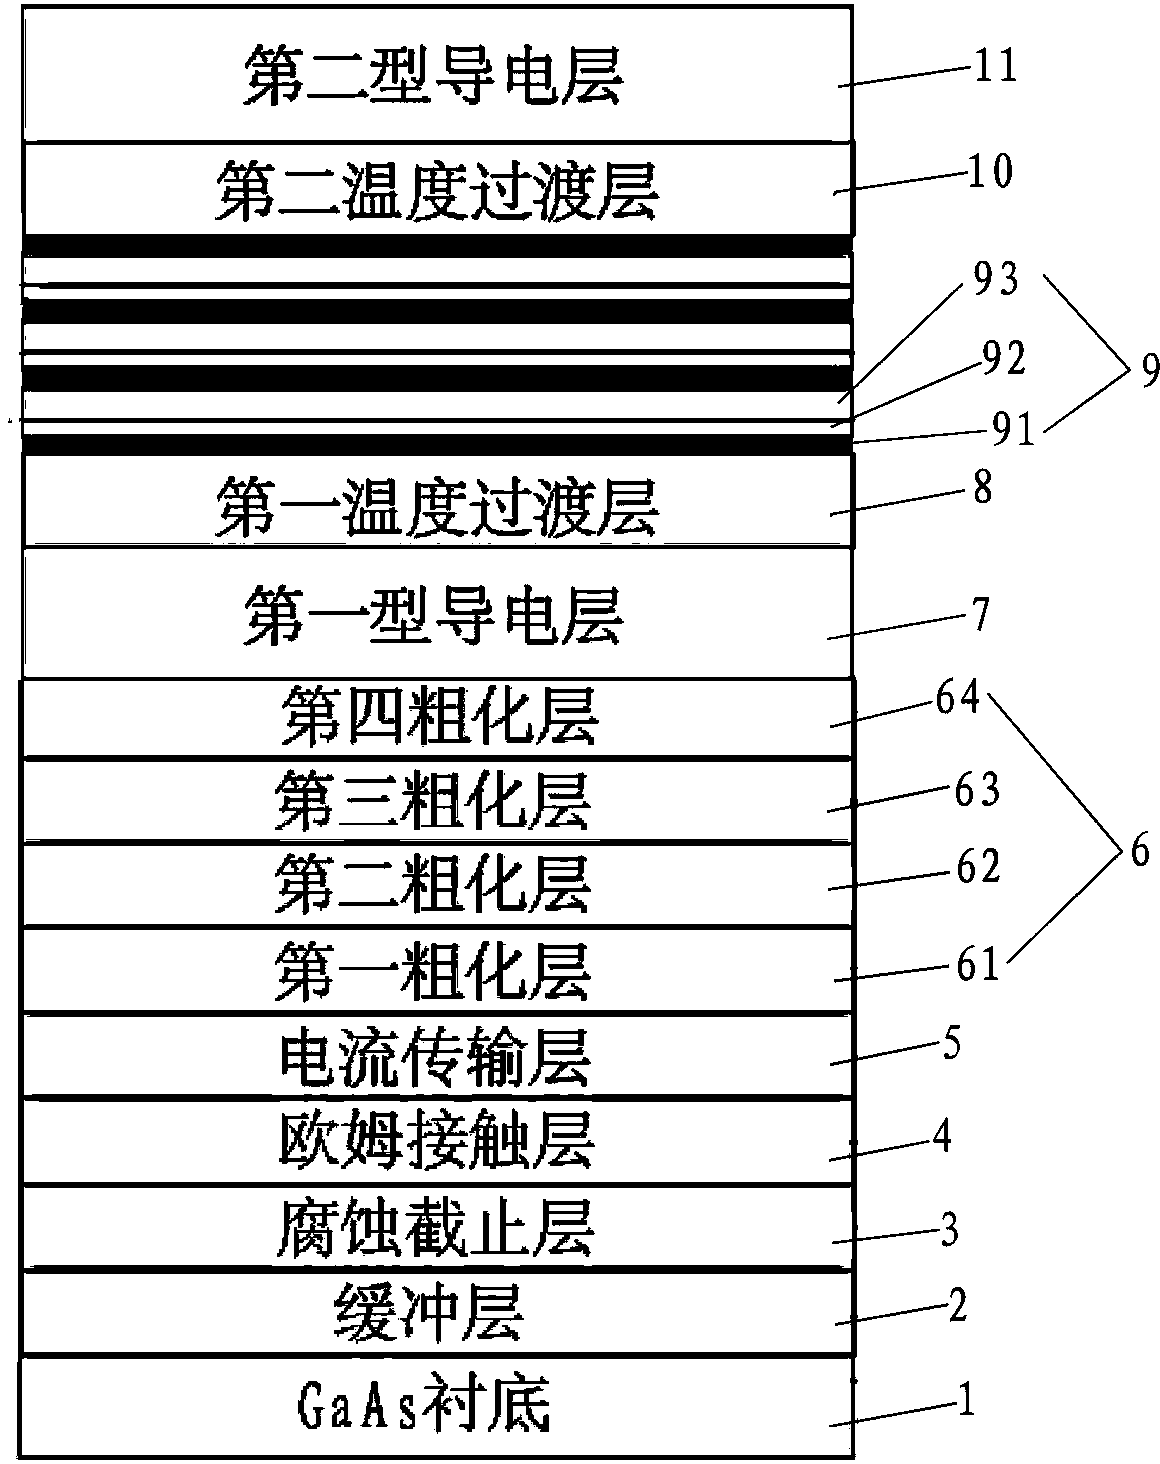 High-crystal-quality infrared light emitting diode